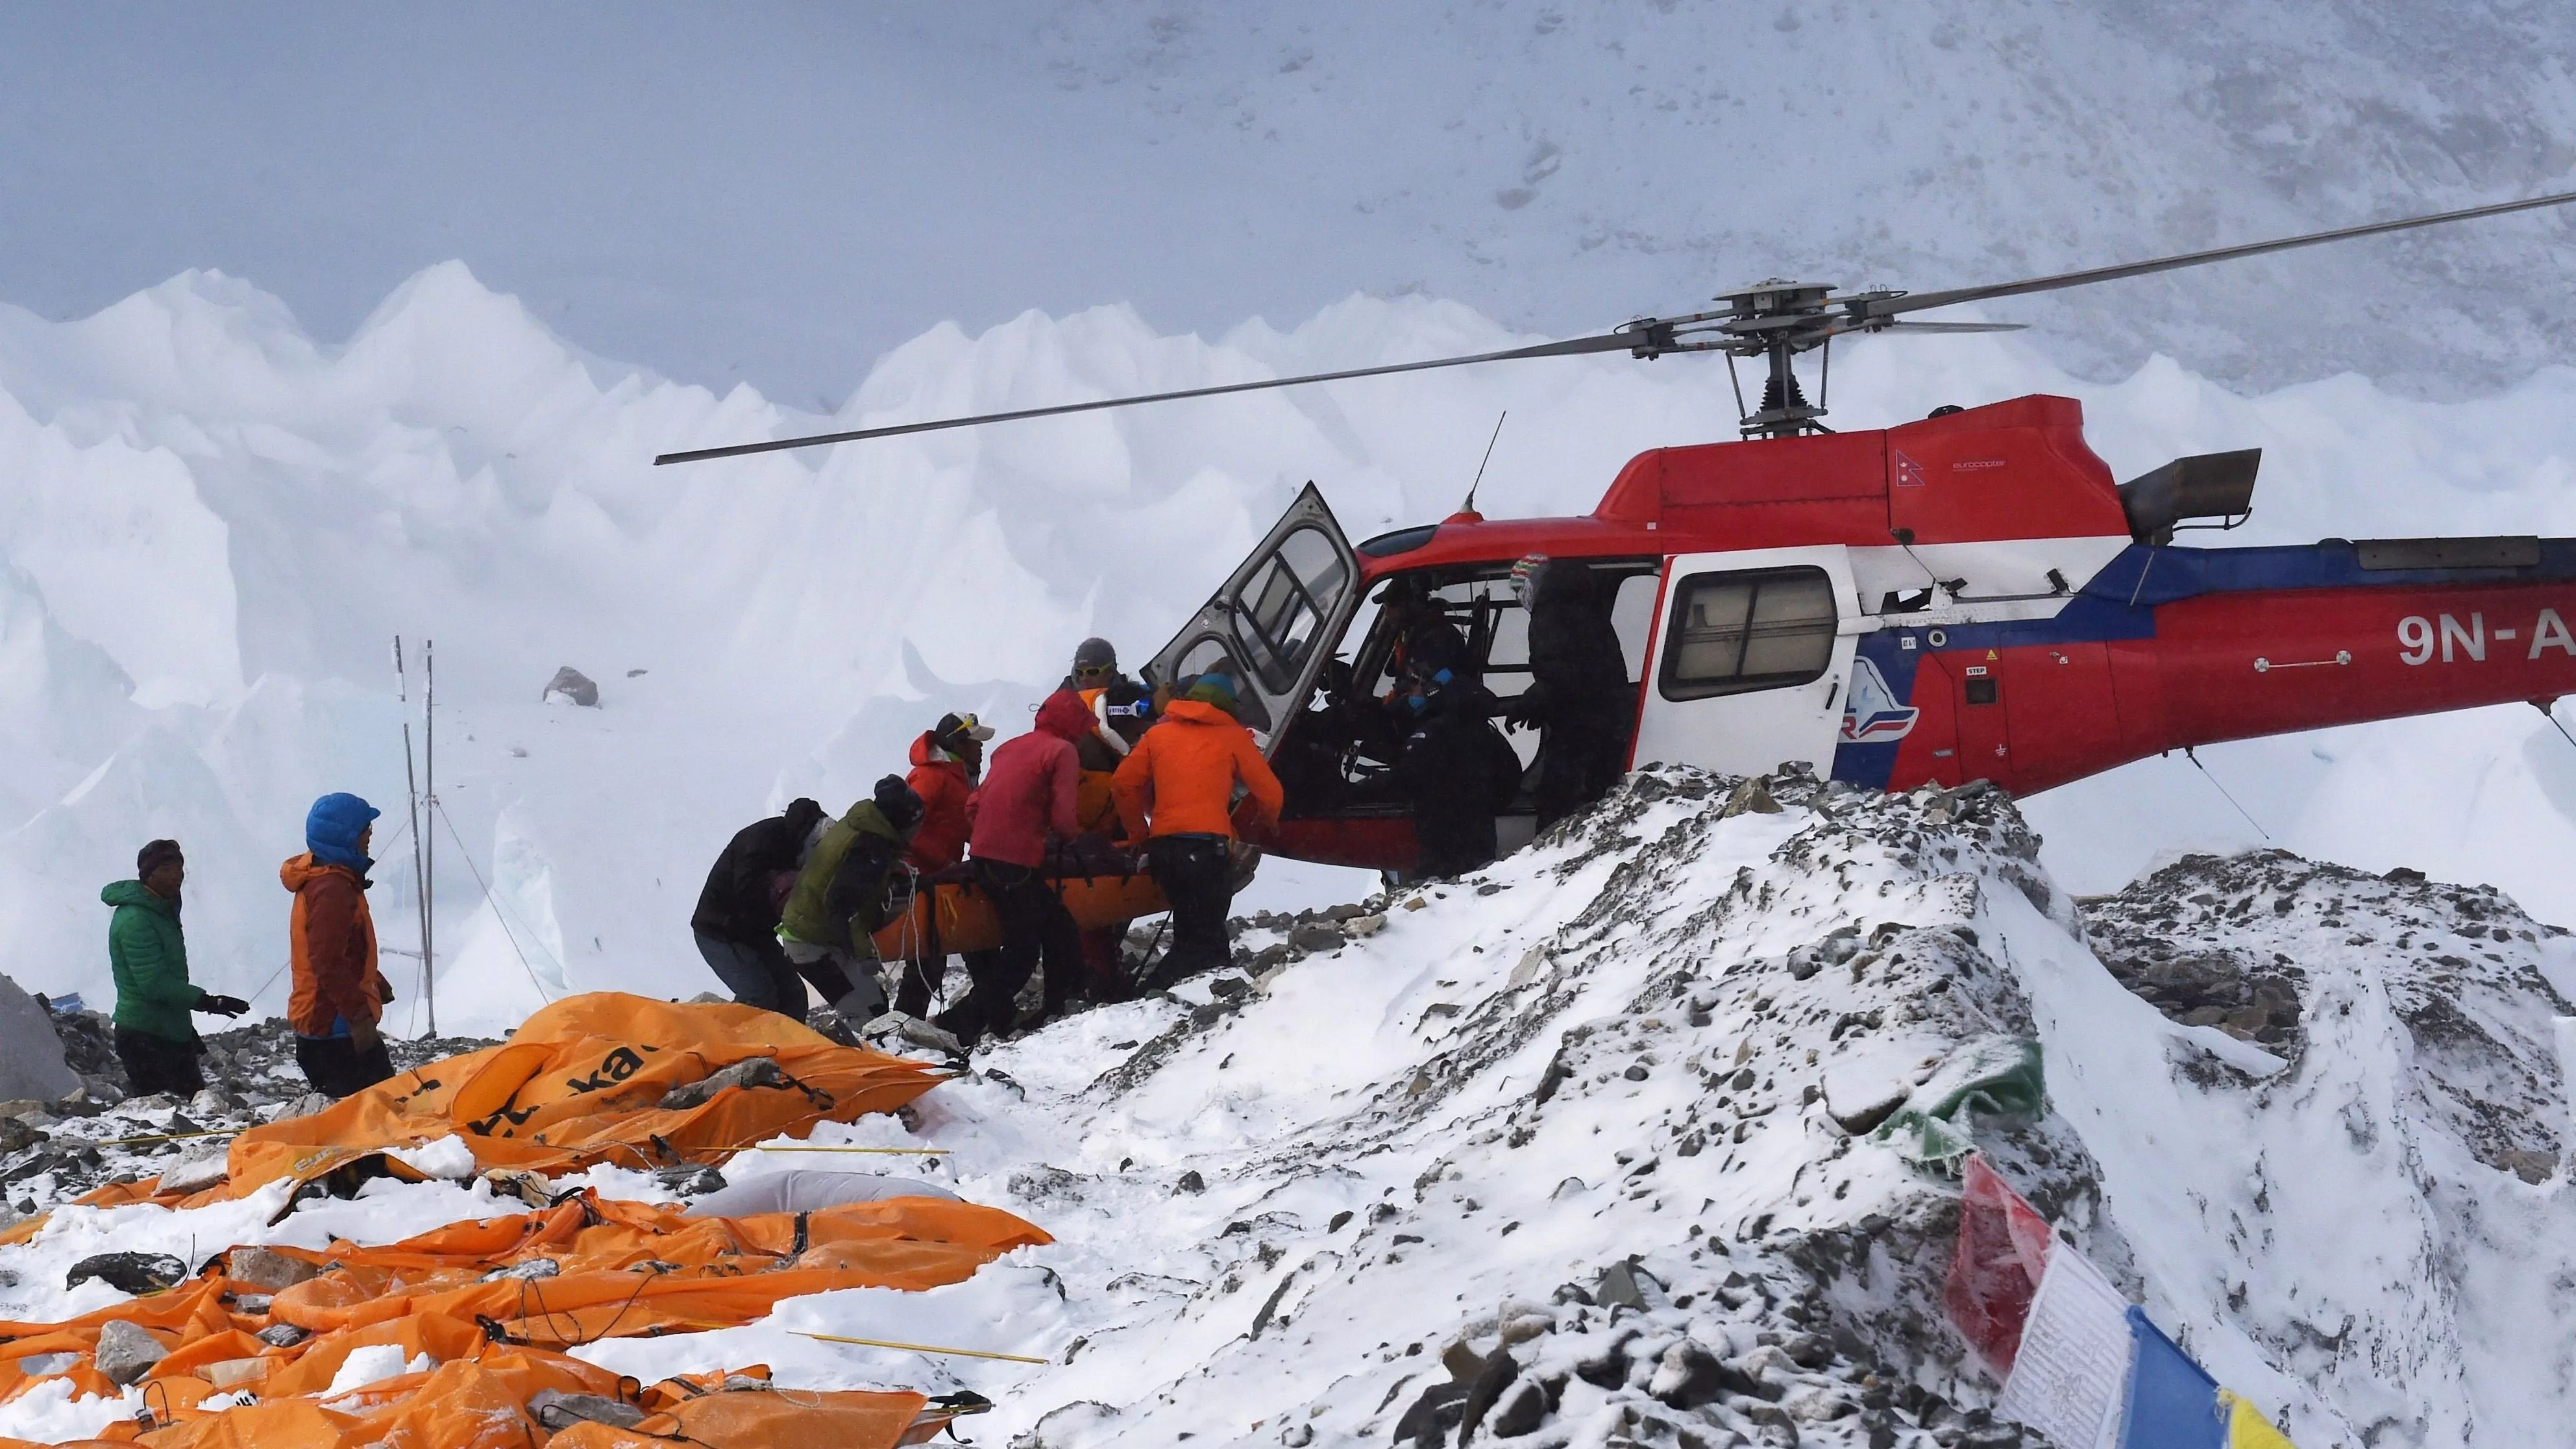 Kailash Himalaya Treks in Nepal, Central Asia | Helicopter Sport - Rated 1